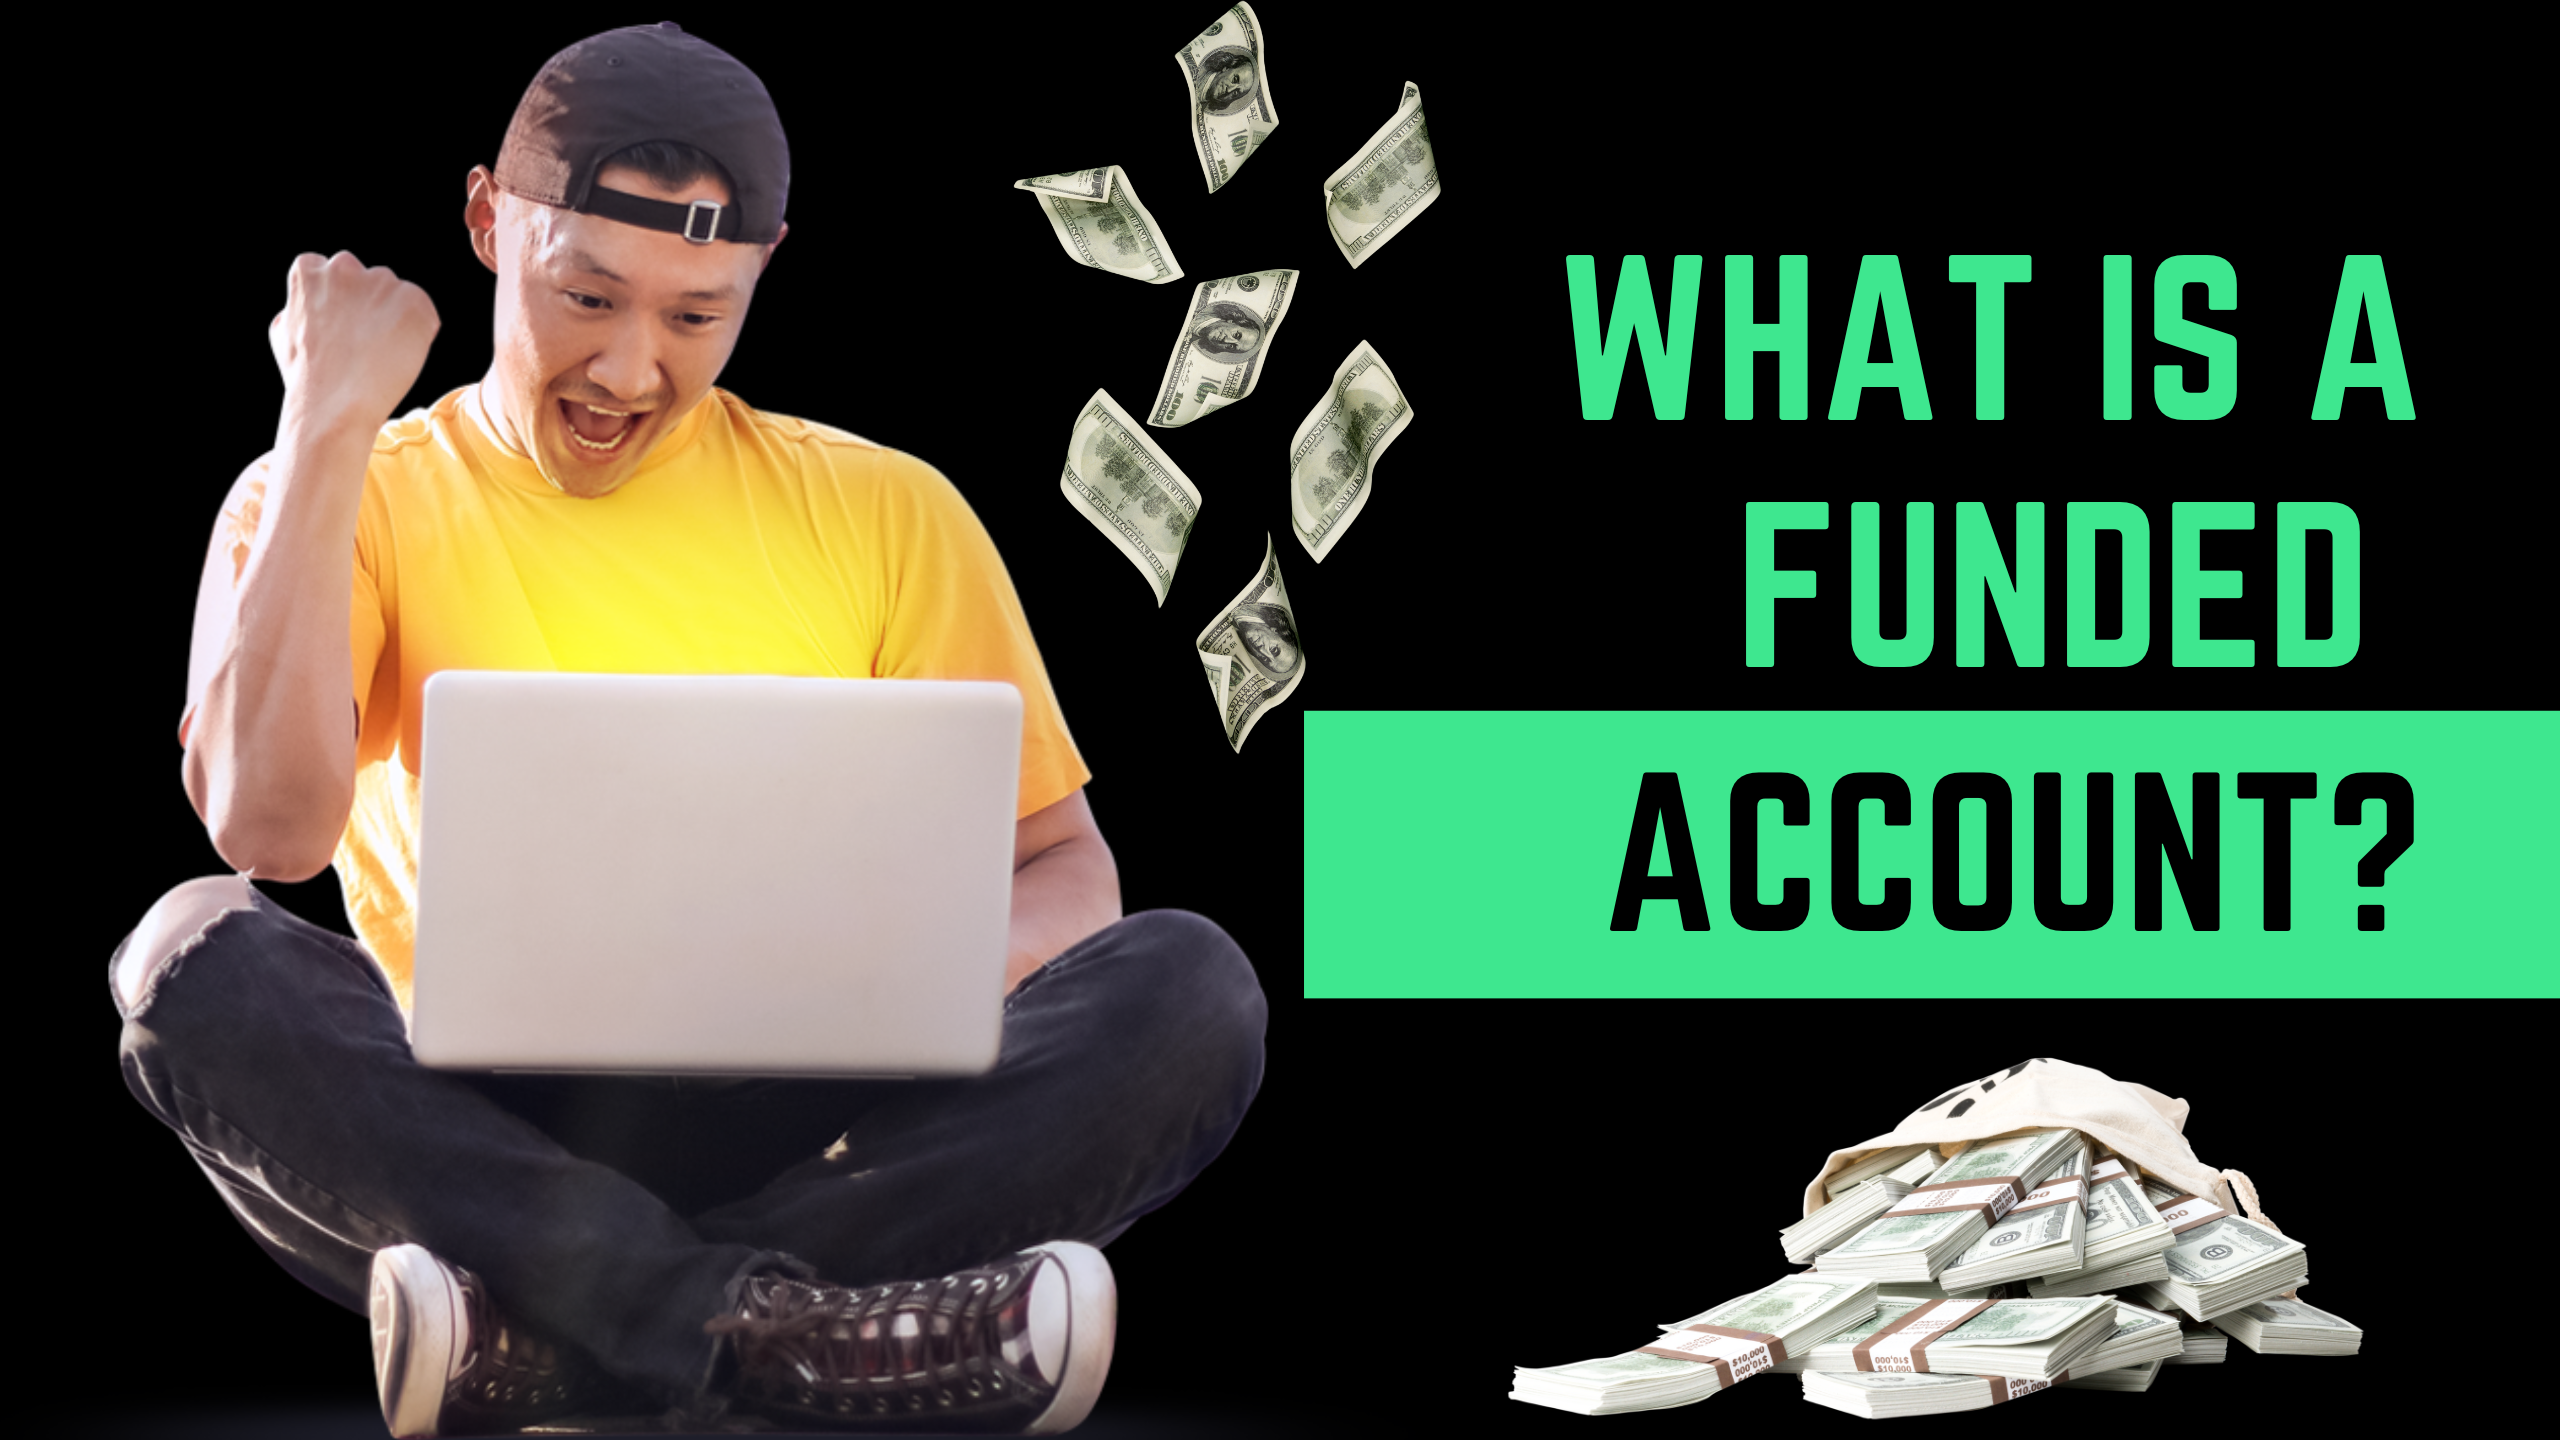 What is a funded account?